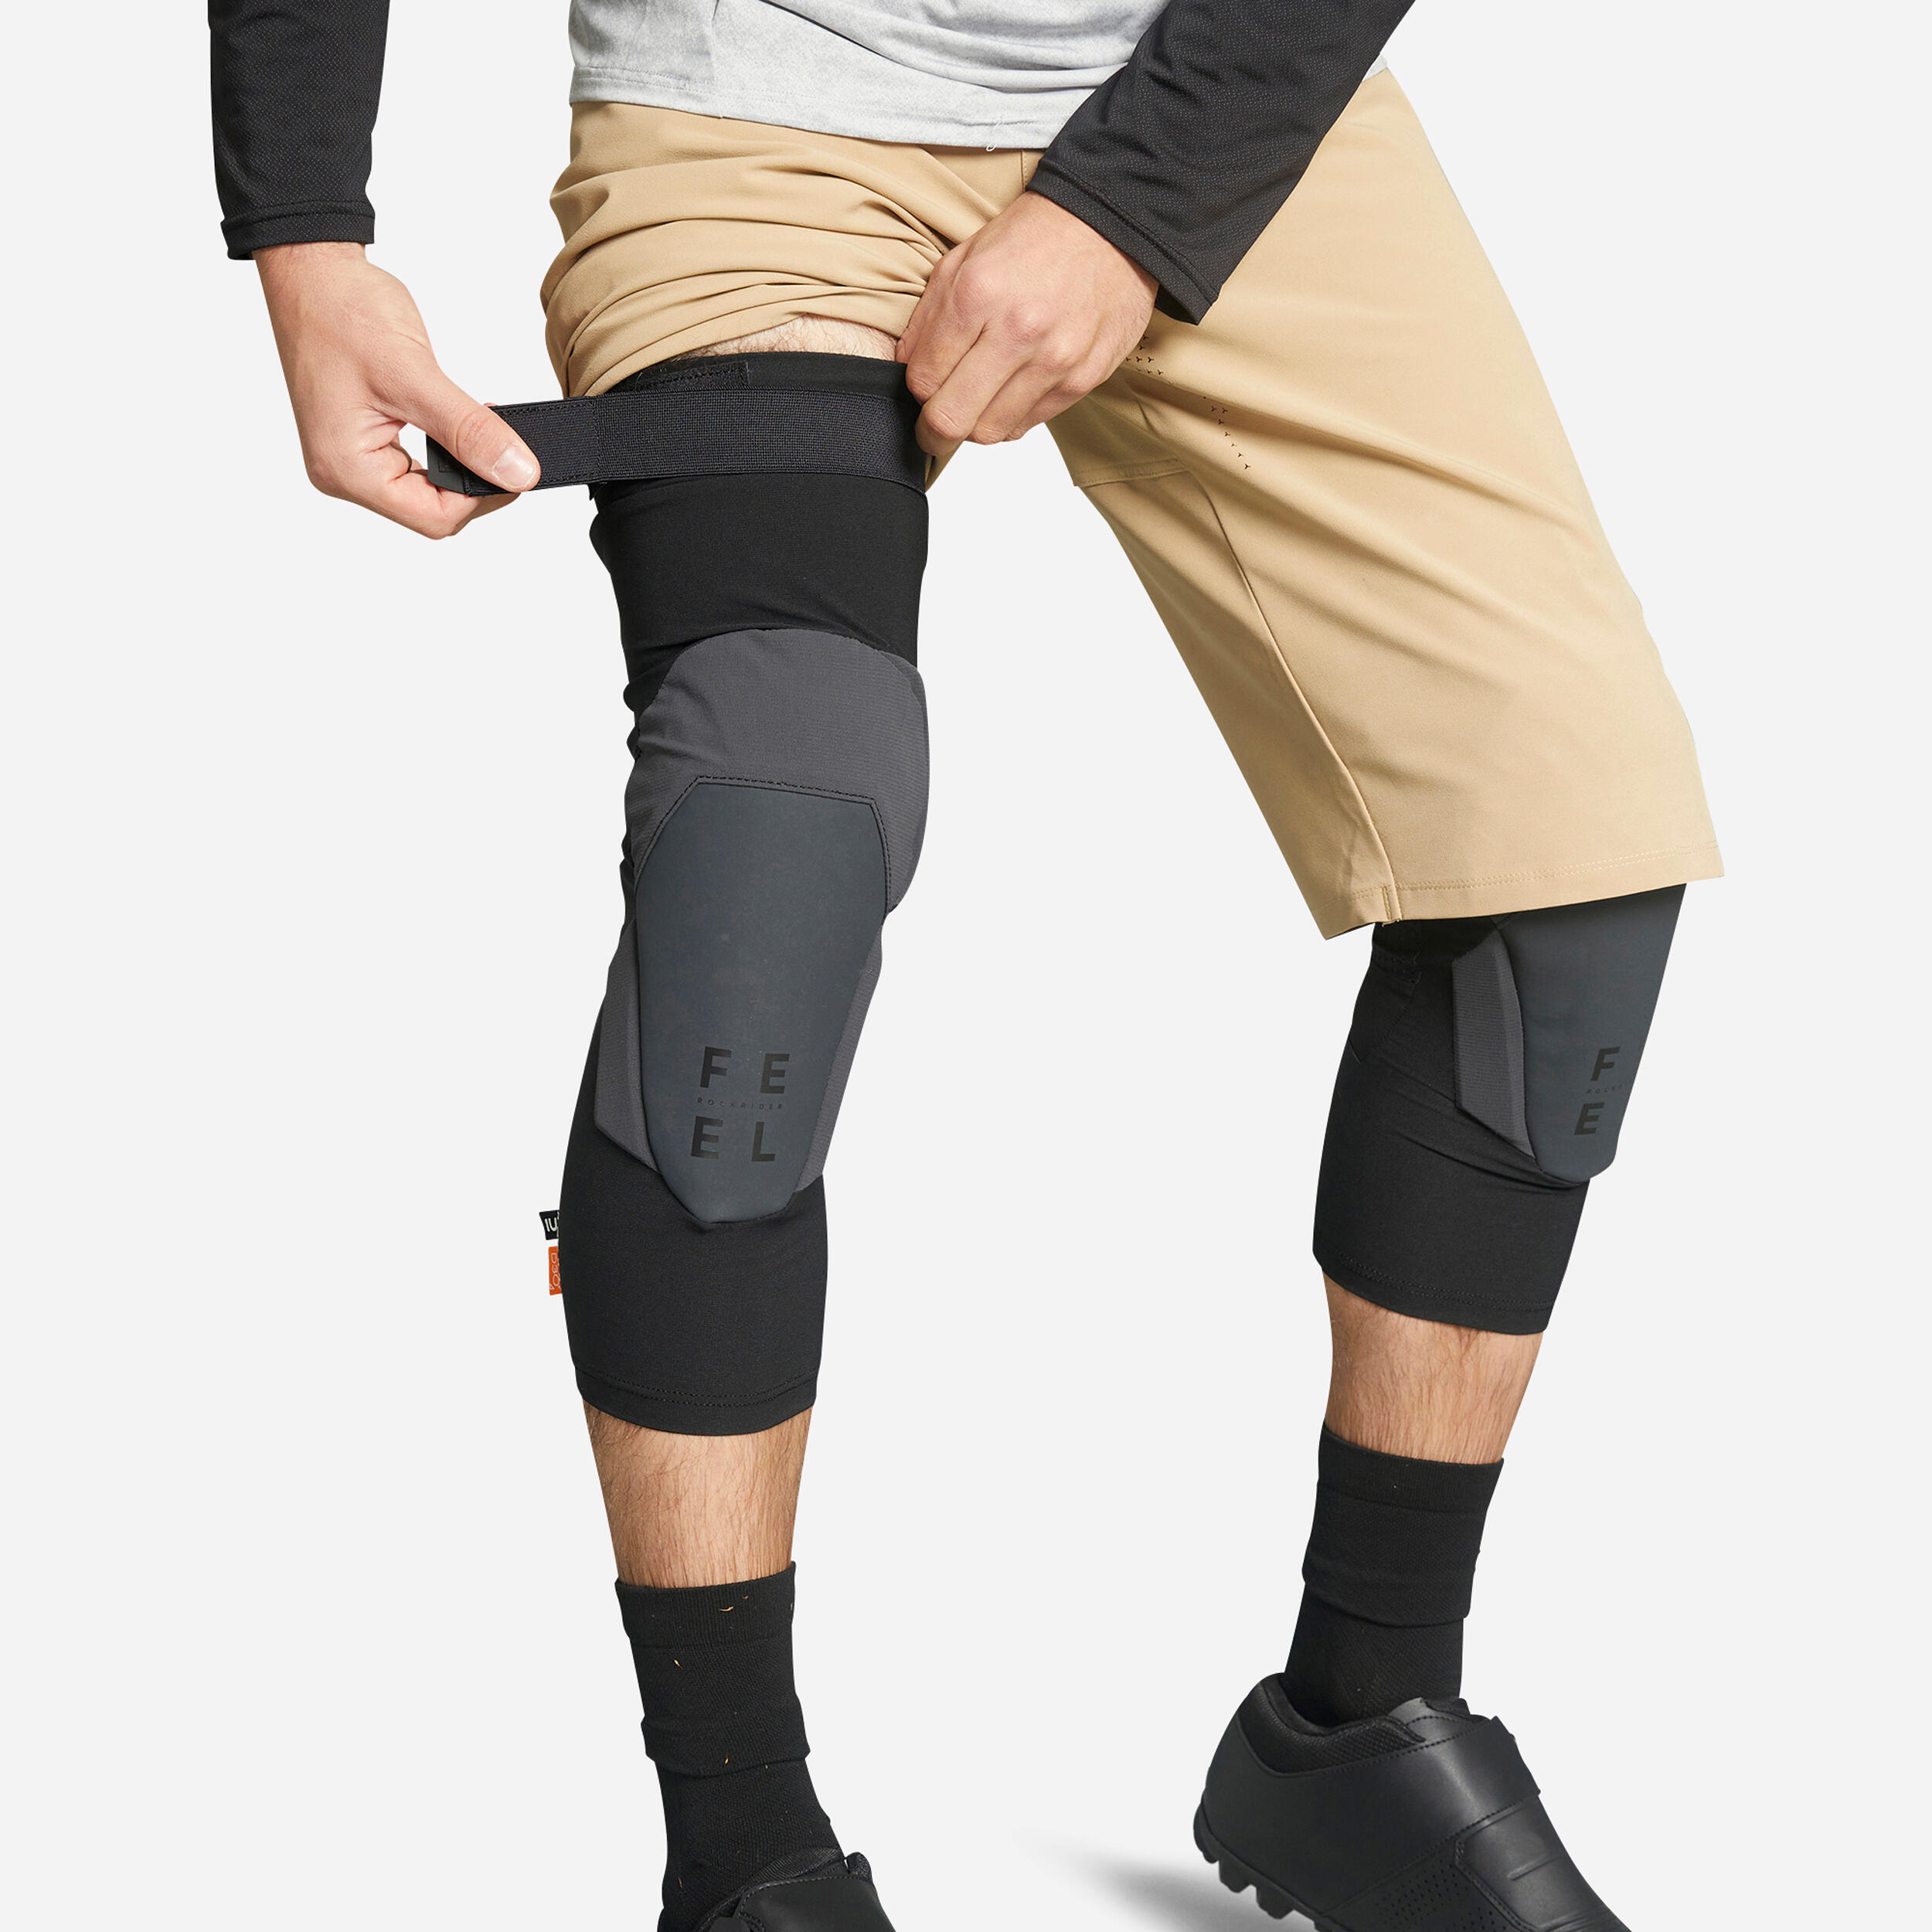 Buy Vissco Patella  Ligament Assisted Knee Support for best price in India